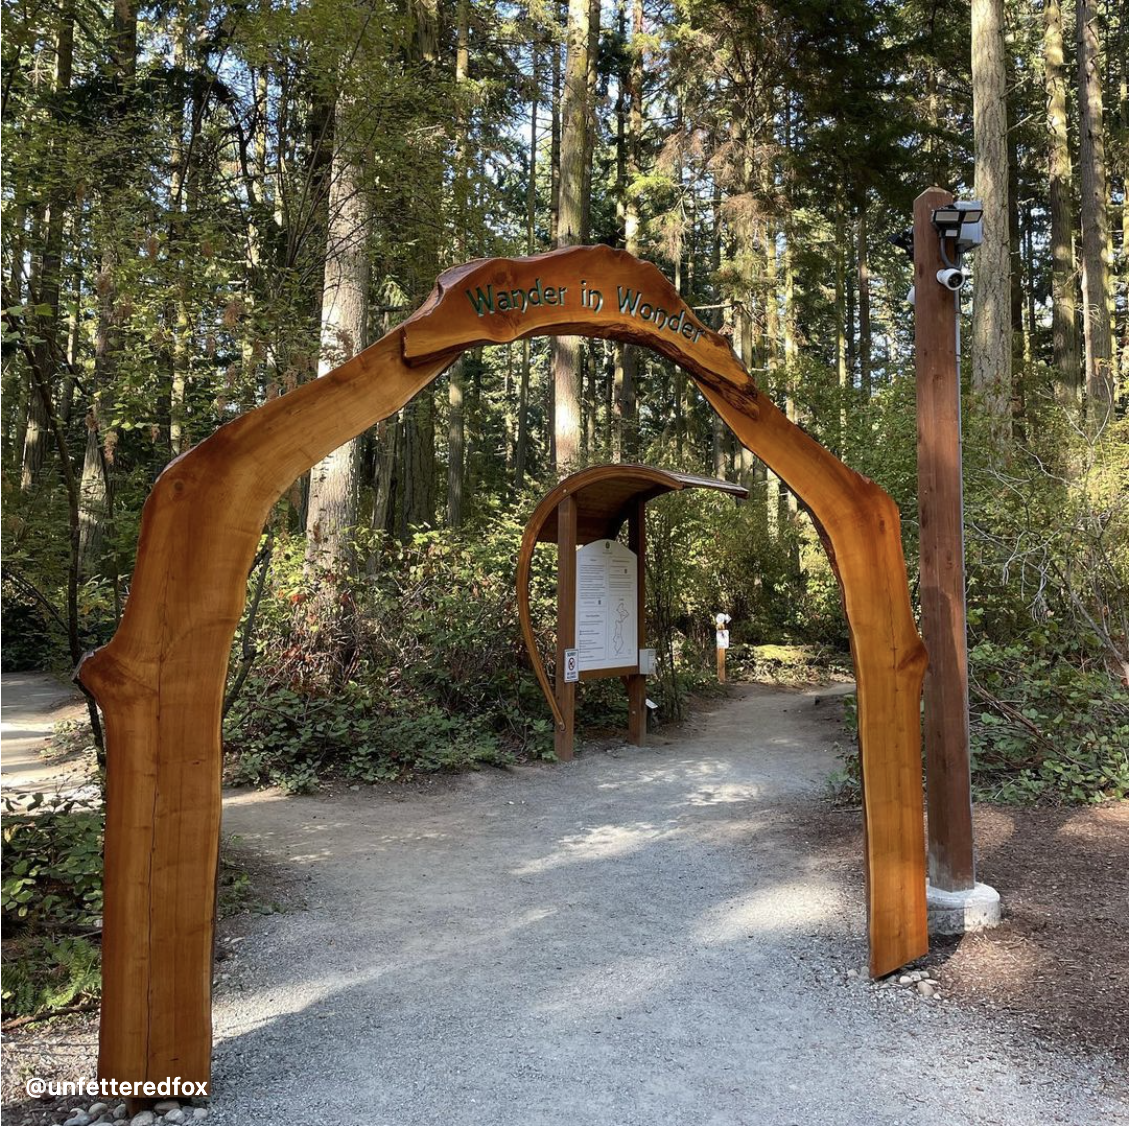 Explore the Price Sculpture Forest, a free half-mile walk showcasing stunning and unique sculpture art in the heart of Washington. Perfect for a family outing or a romantic stroll